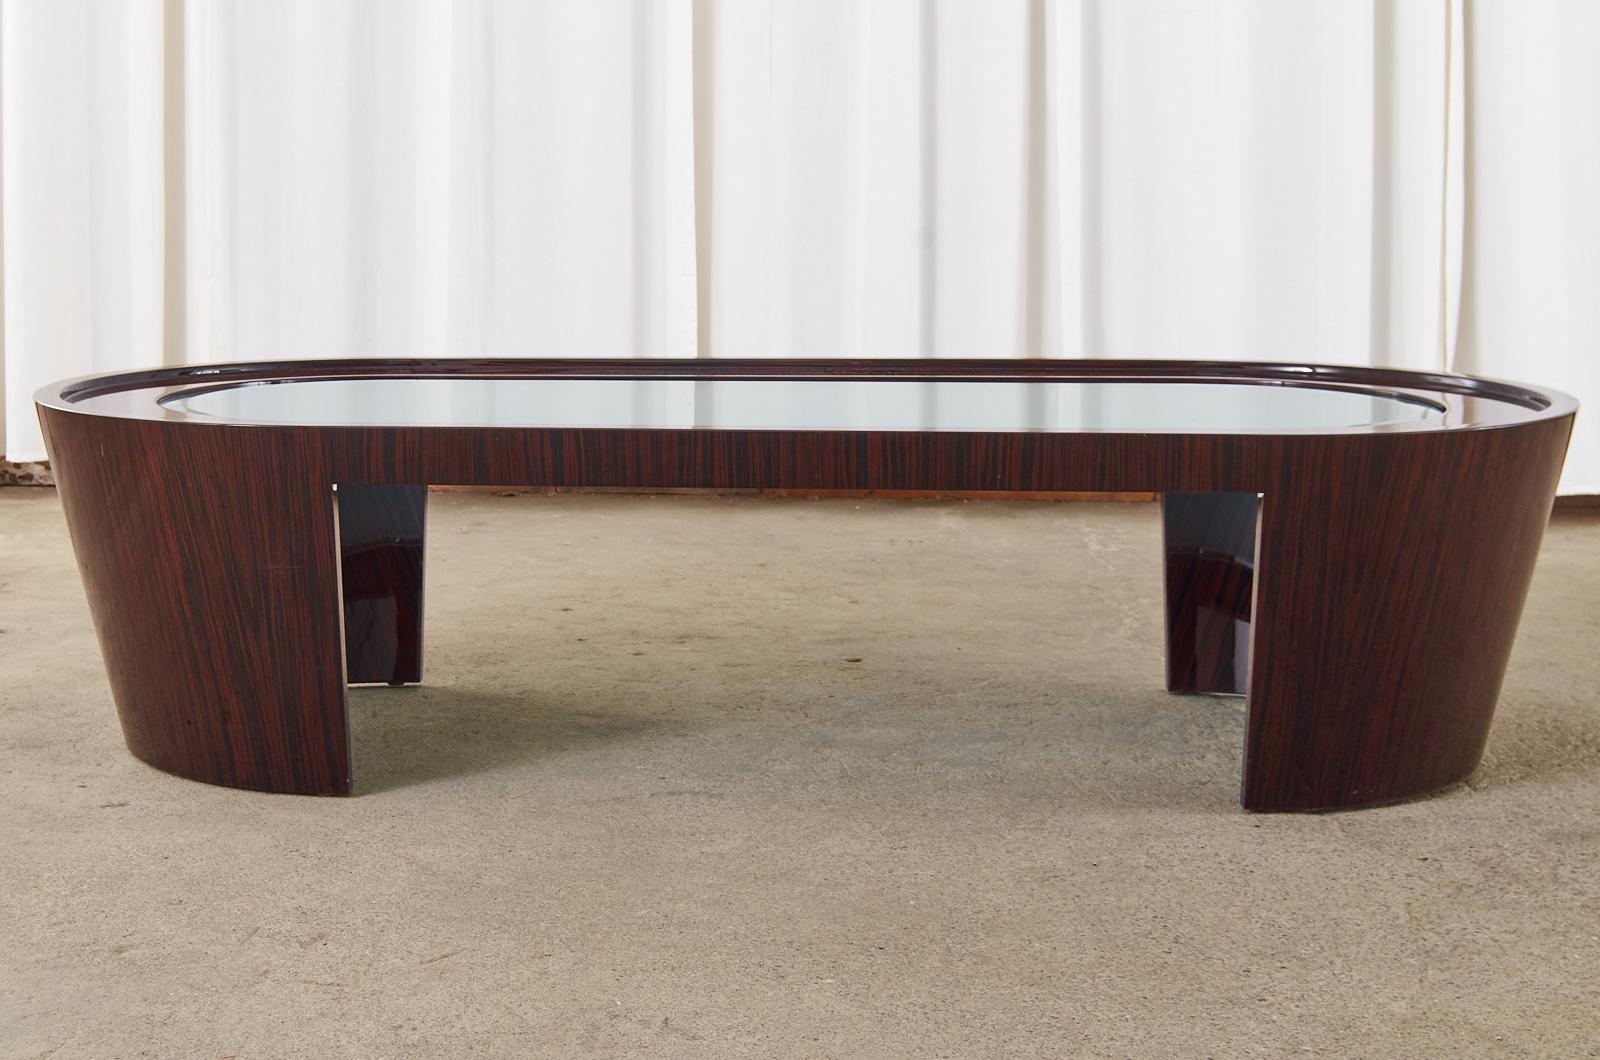 Fantastic cocktail table designed by Dakota Jackson. The grand cocktail coffee table features a wood frame encased in Macassar ebony veneer. The large table resembles a bathtub with dramatic flared sides and rounded ends. The top of the table is